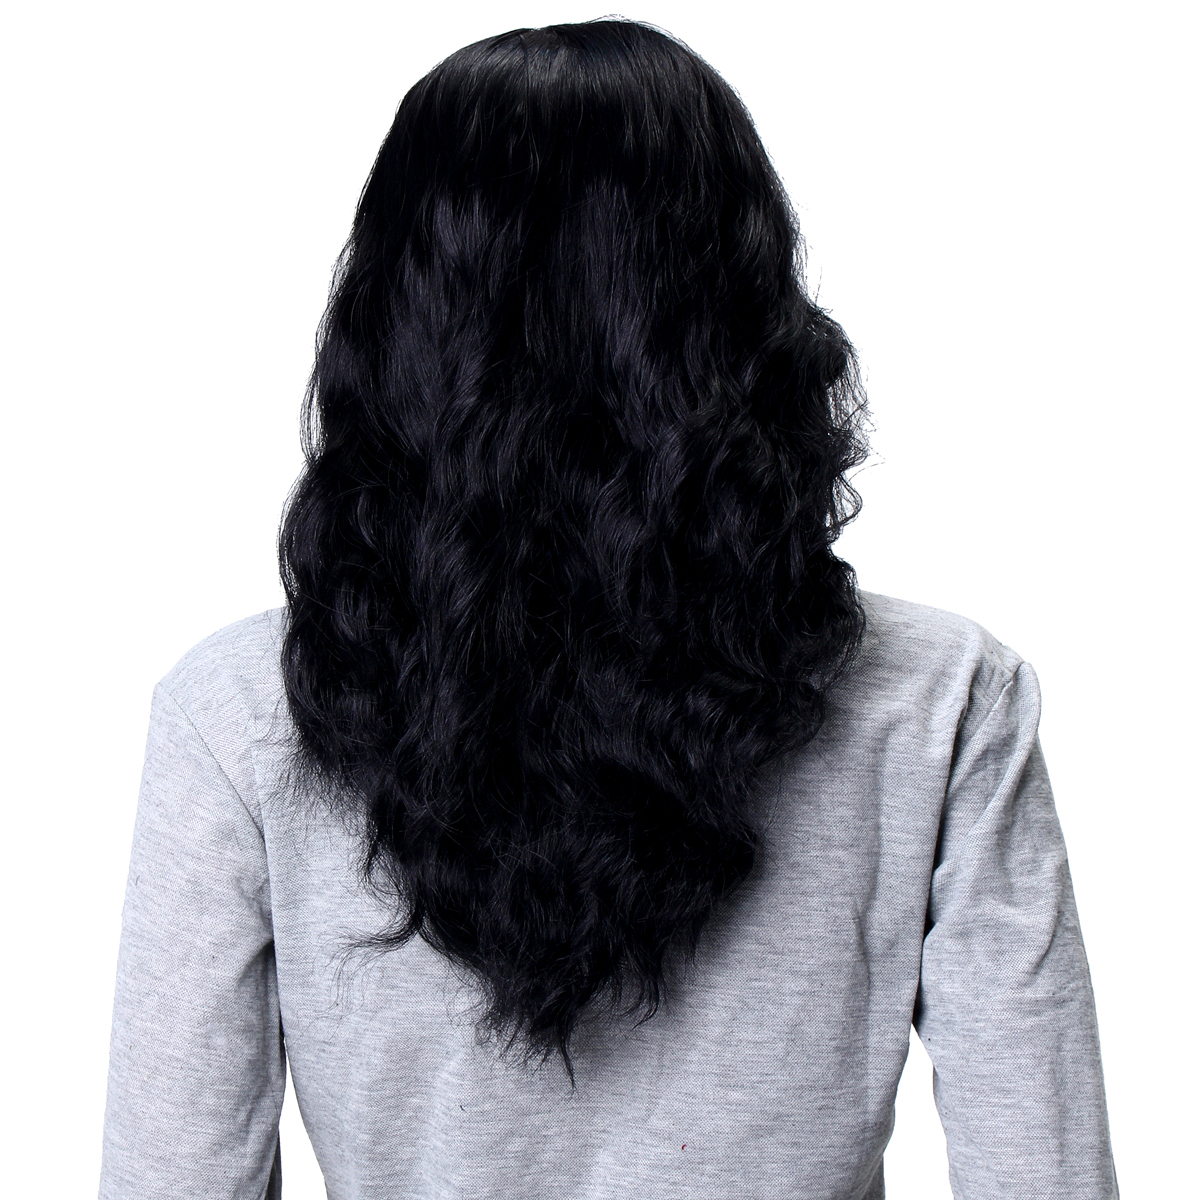 Black-Wig-Women-Long-Curly-Wavy-Synthetic-Hairstyle-Fashion-Heat-Resistant-1288680